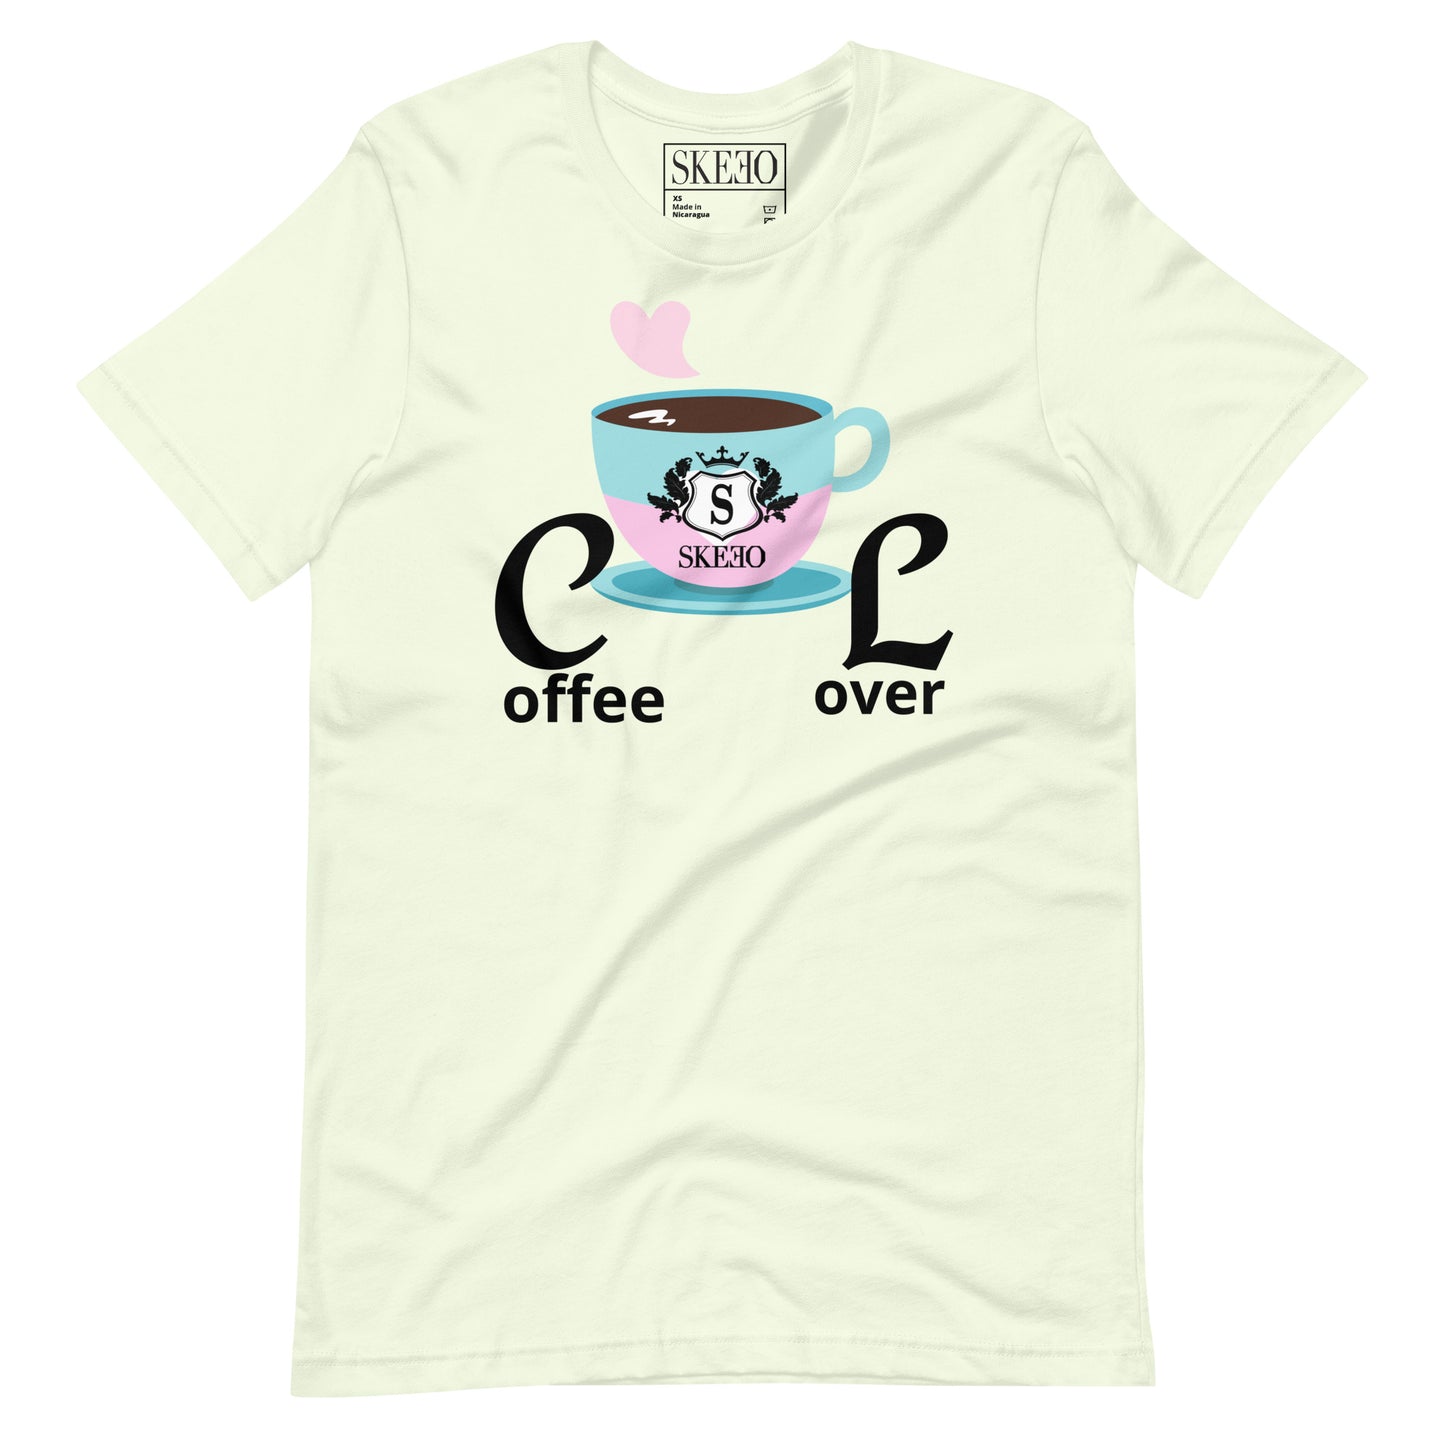 A ASK Coffee t-shirt